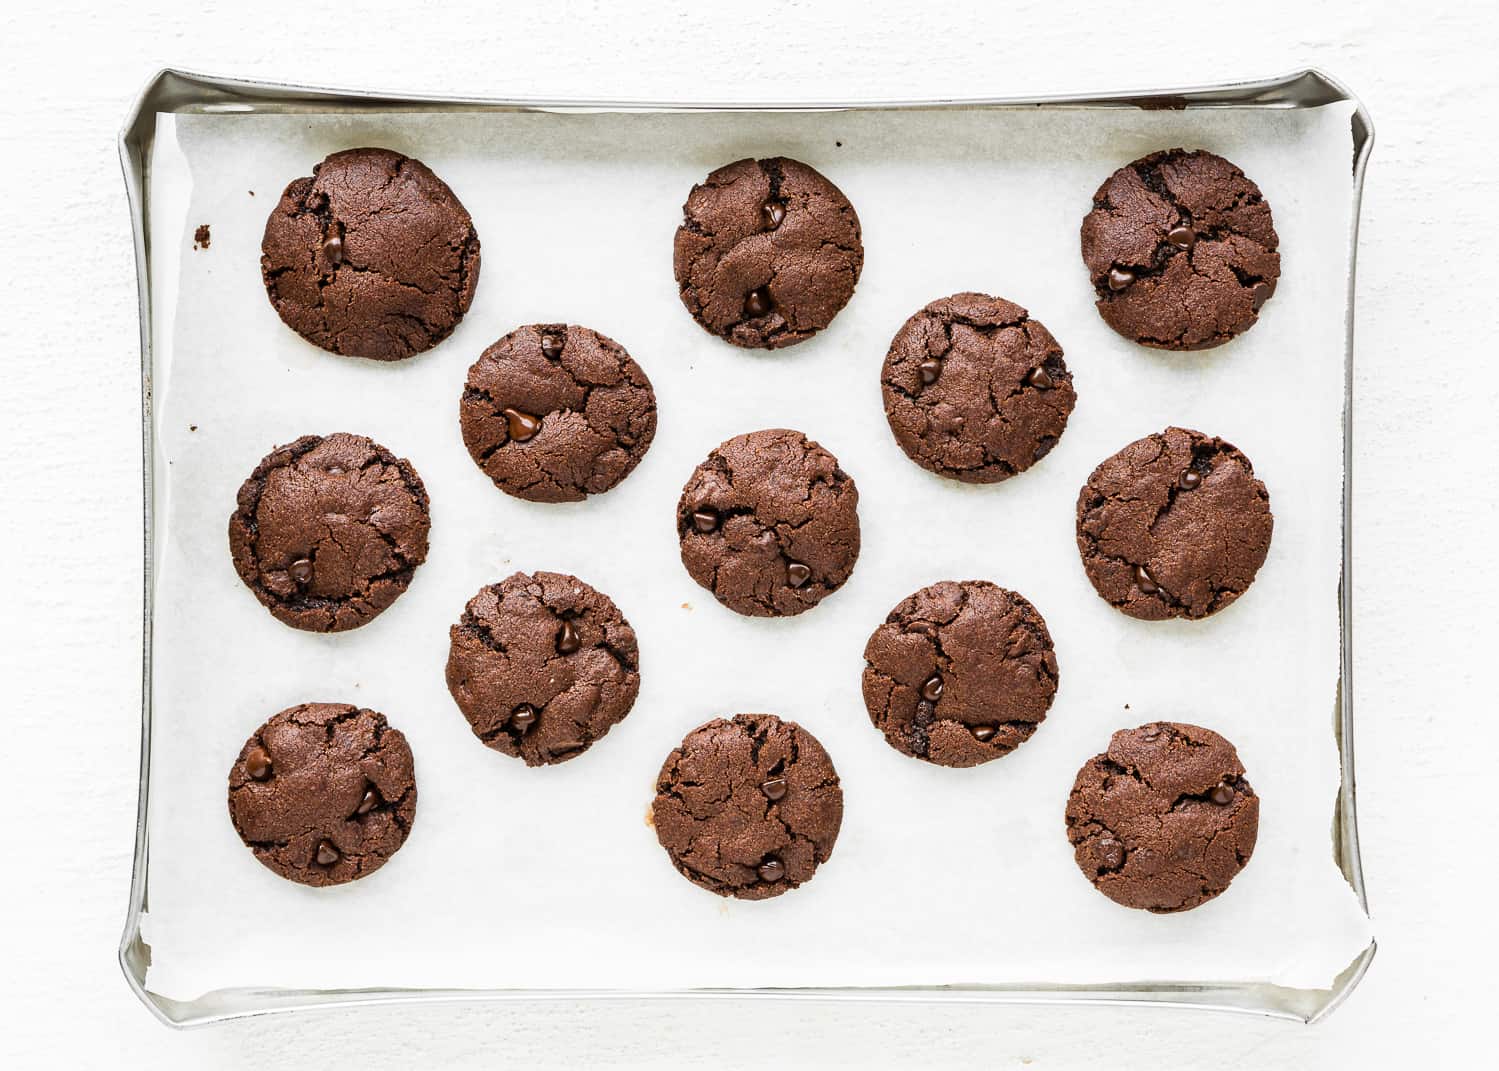 BAKE Eggless Triple Chocolate Peppermint Cookies ON A BAKING TRAY